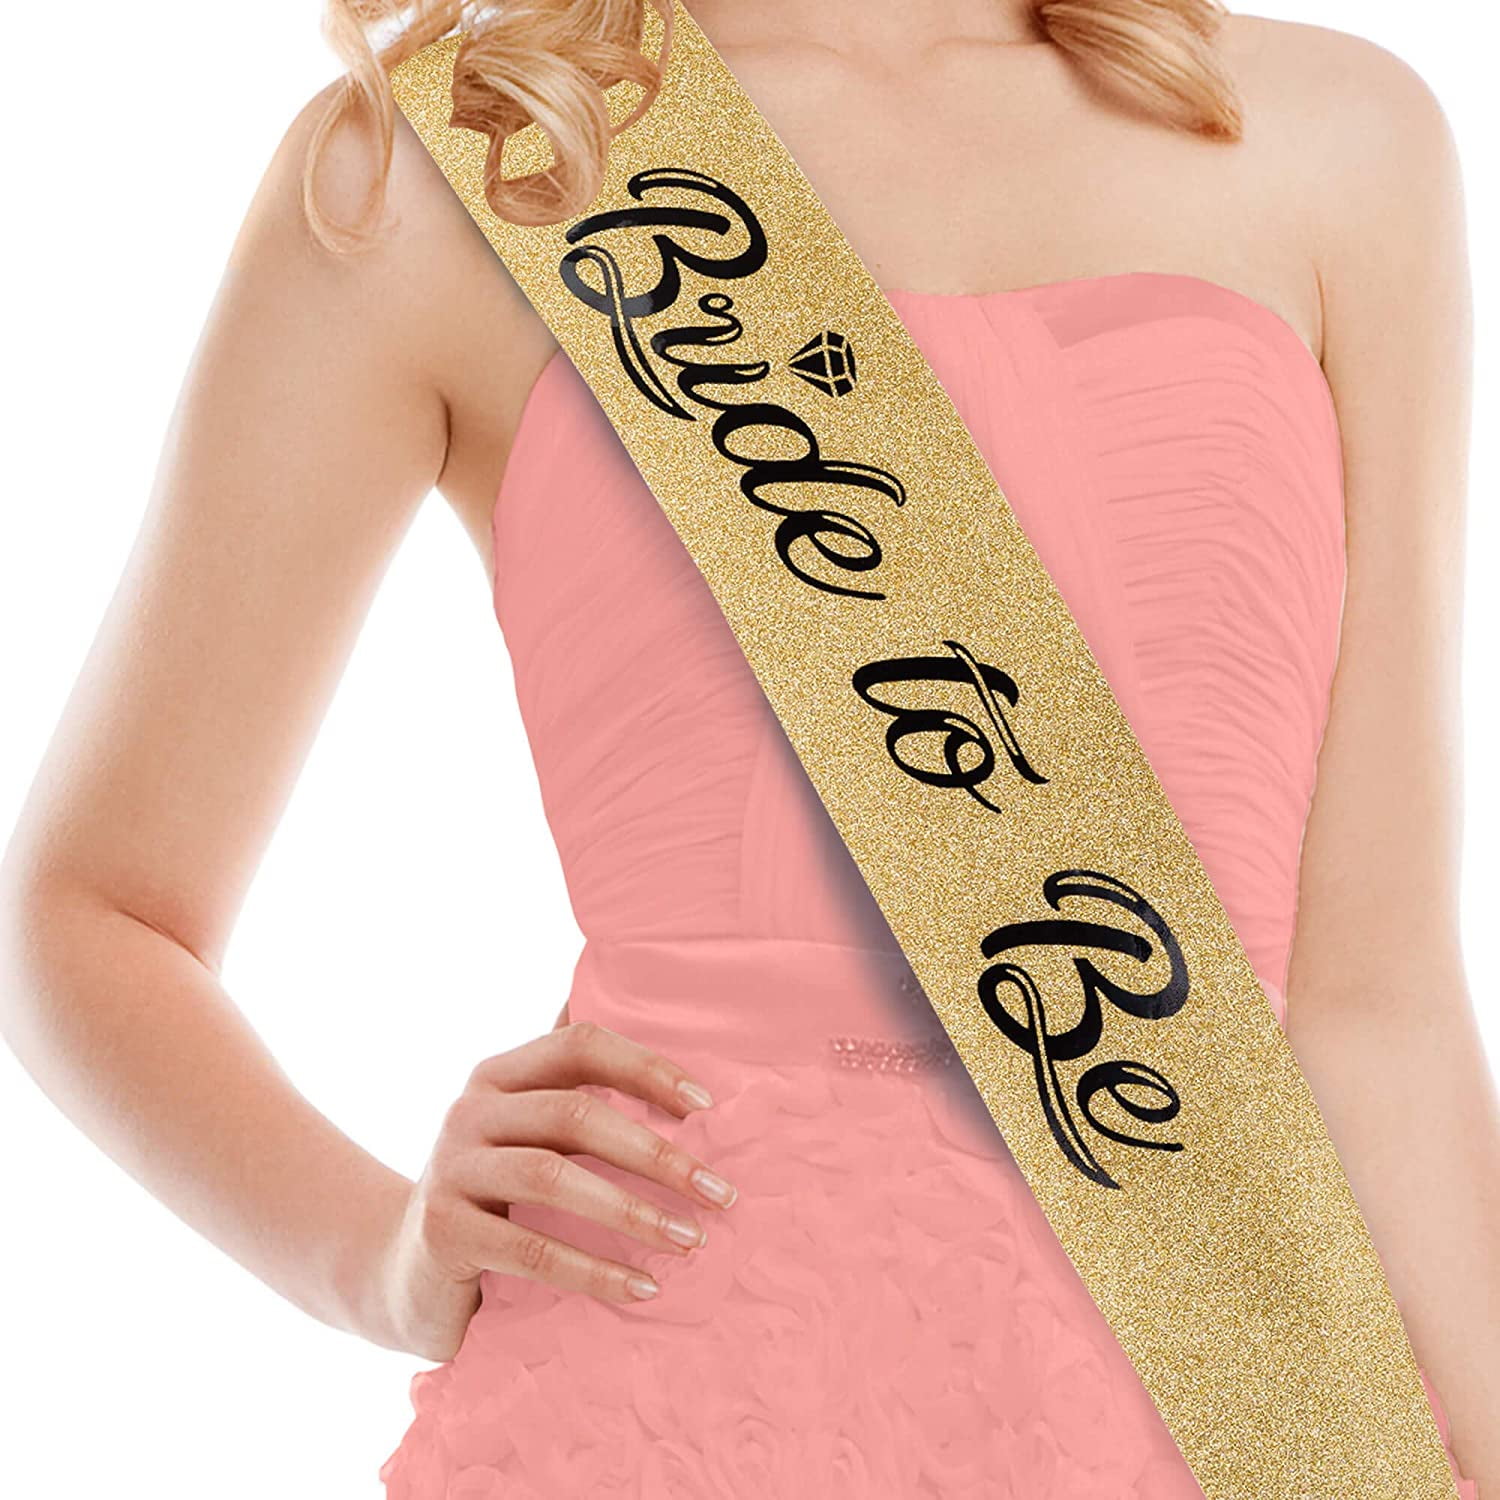 Bride To Be Sash Bachelorette Party Shower Wedding Decorations Accessories Gifts